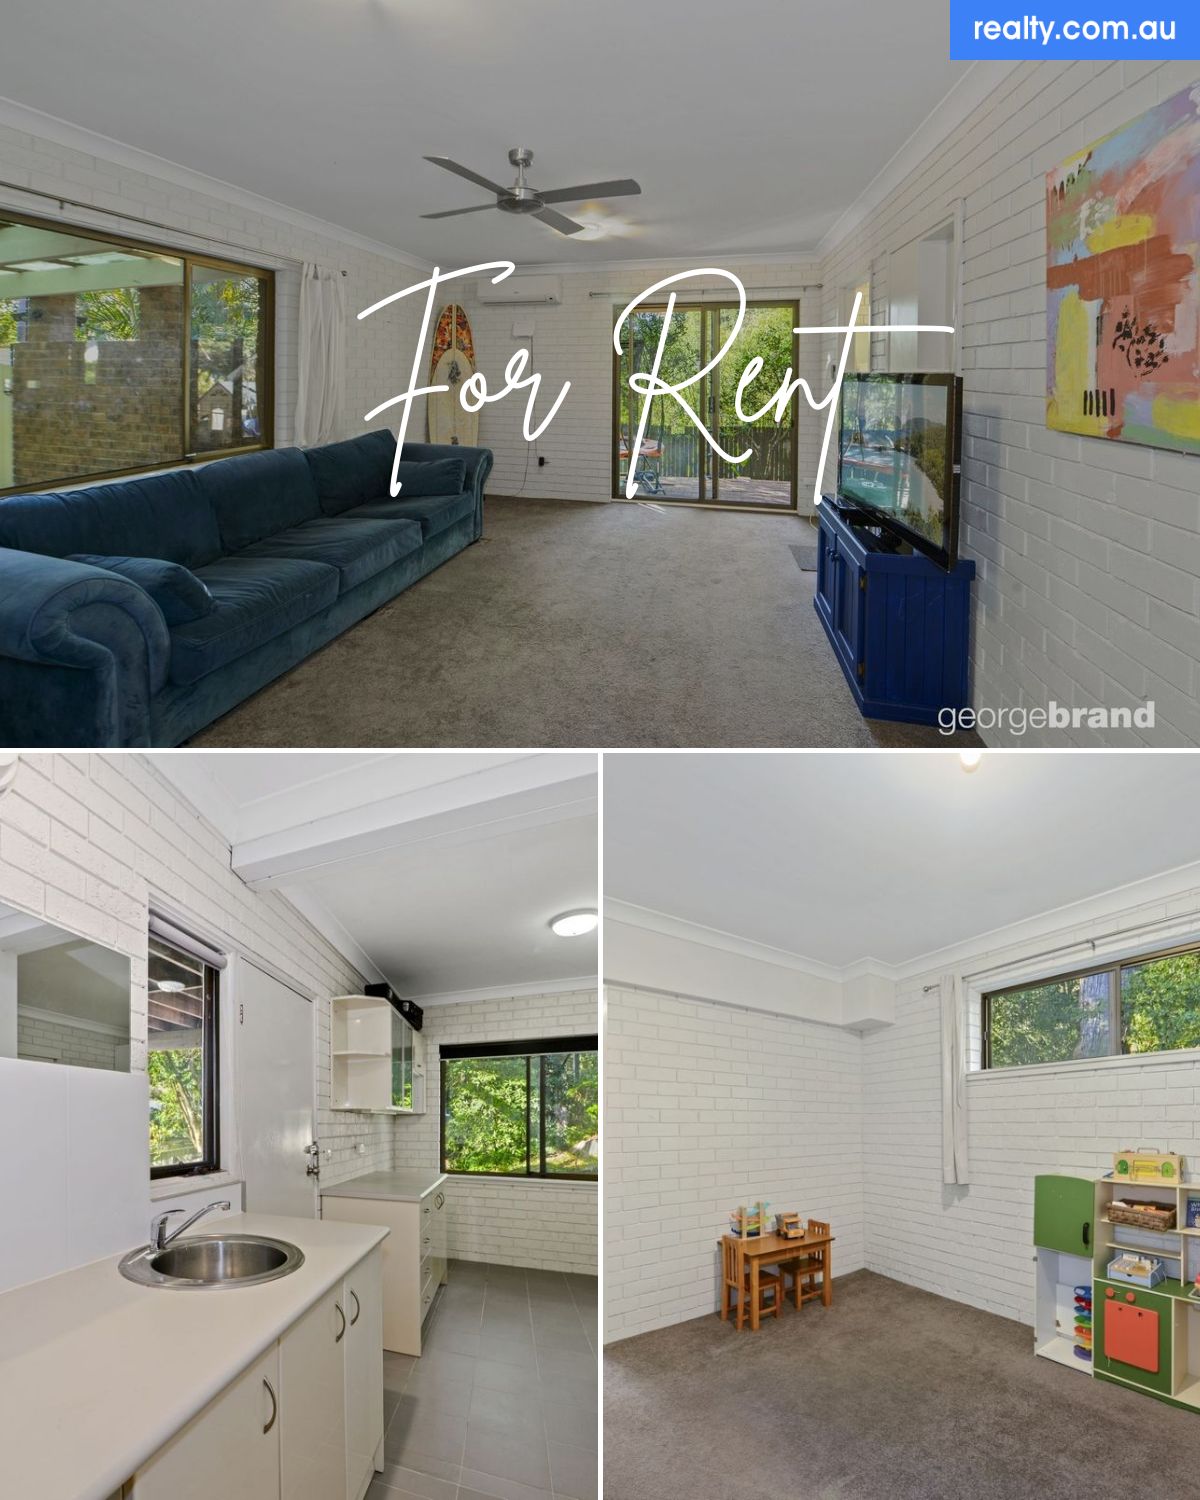 2/14a Redgrove Street, Green Point, NSW 2251 | Realty.com.au